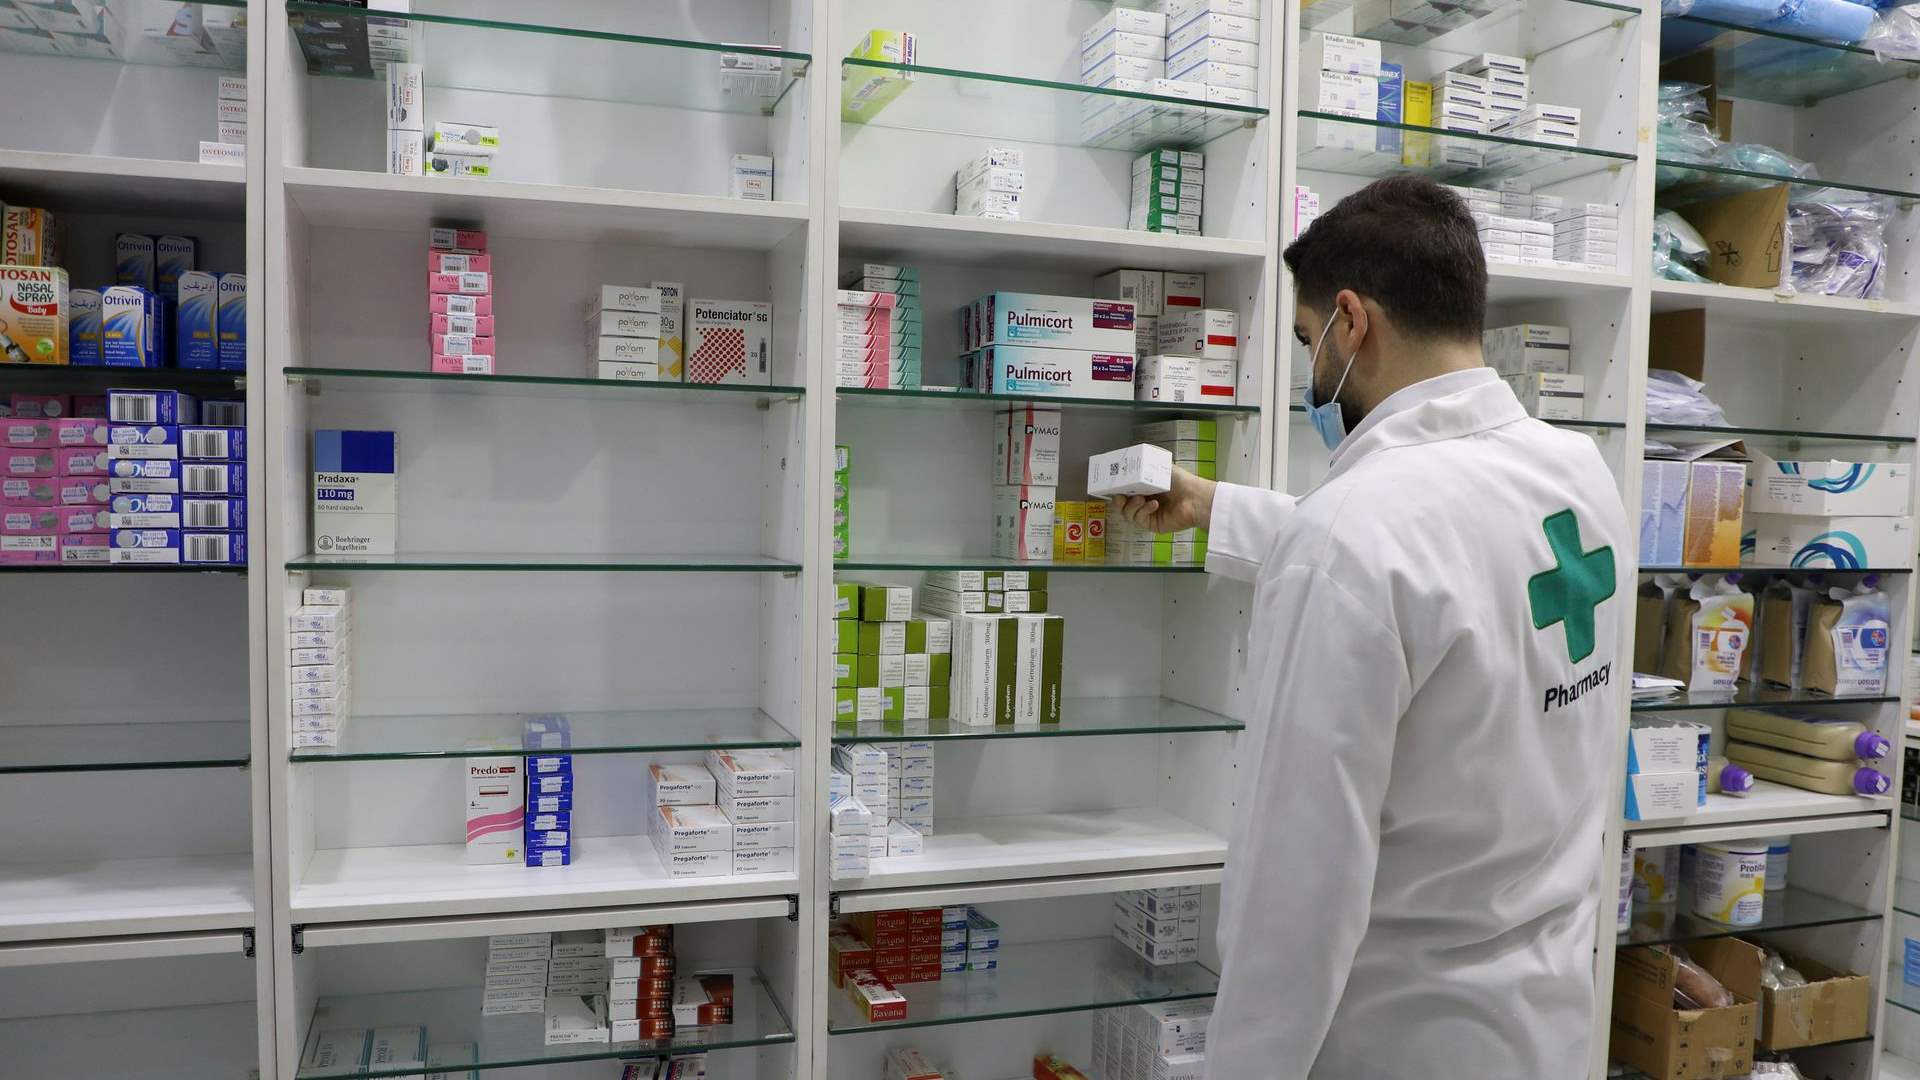 Health ministry to publish daily rates for unsubsidized drugs